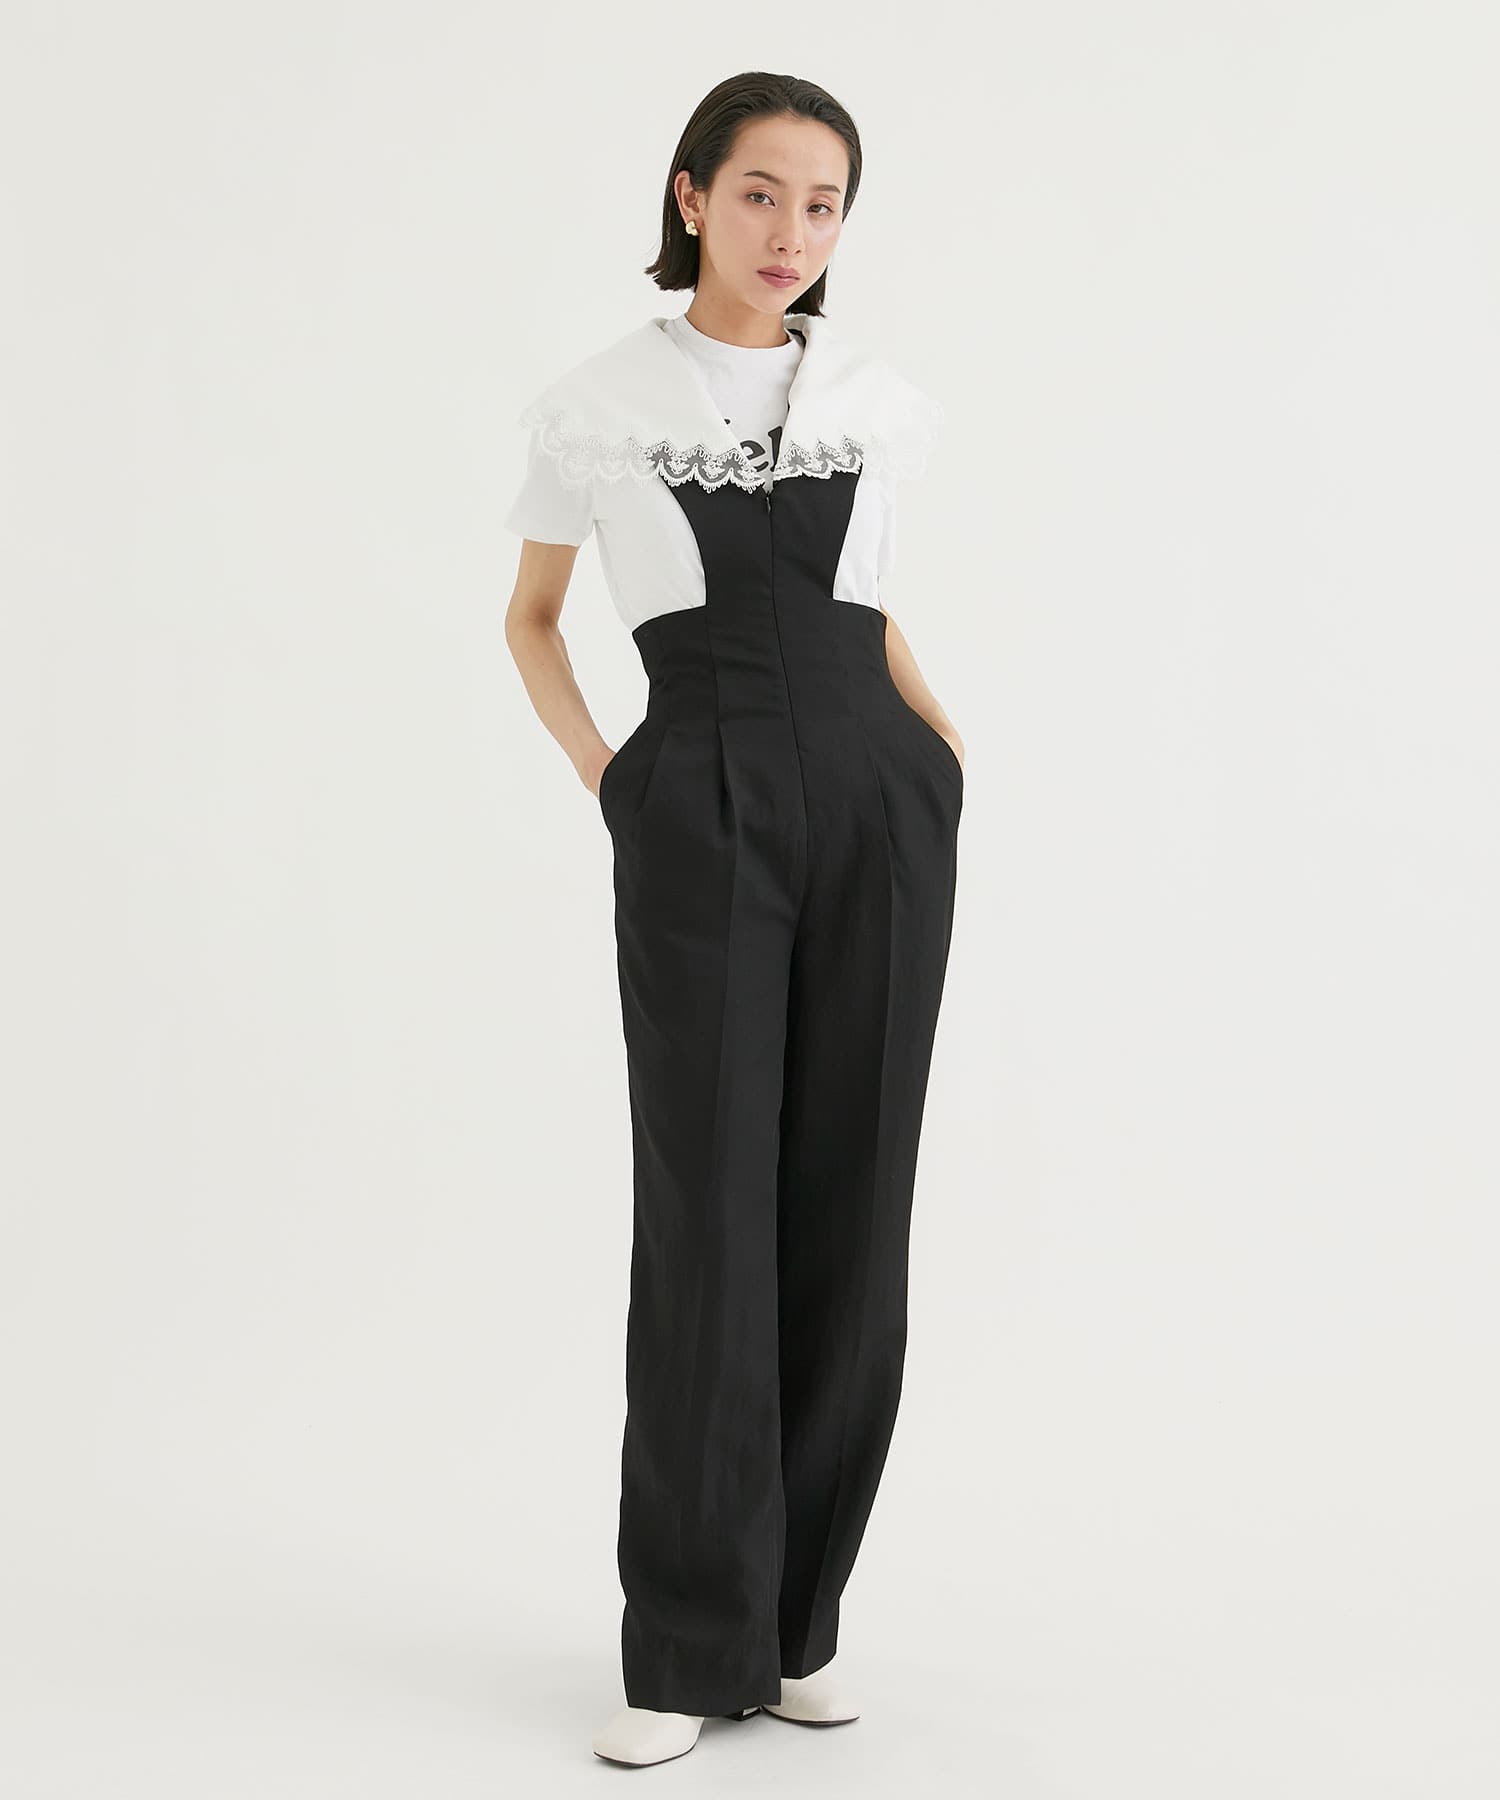 EMBROIDERY COLLAR JUMPSUIT